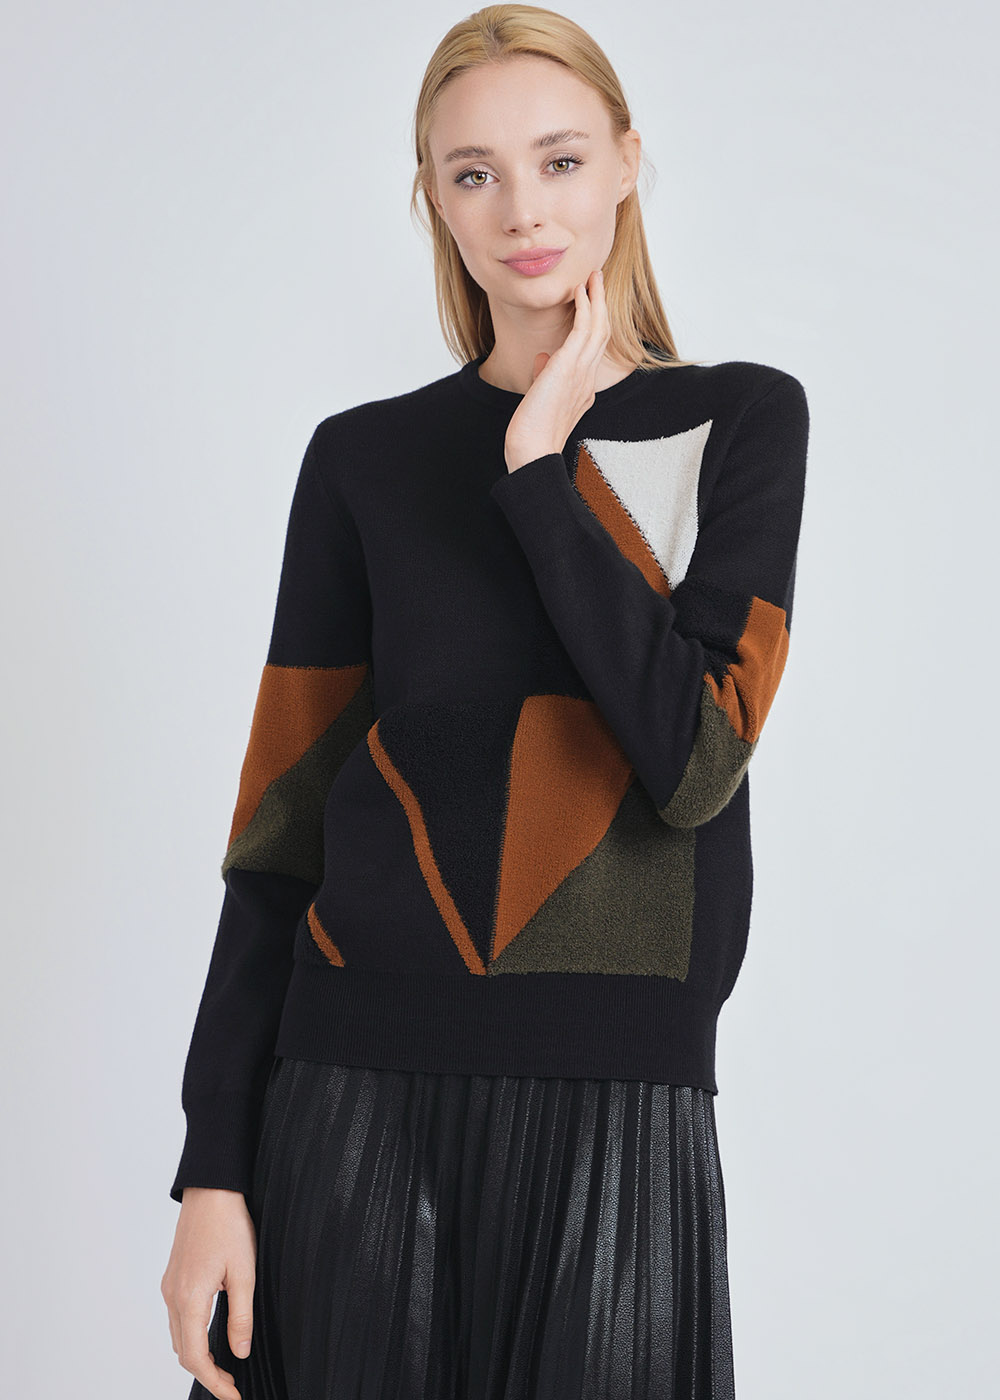 Black Knit Sweater with Shape Details